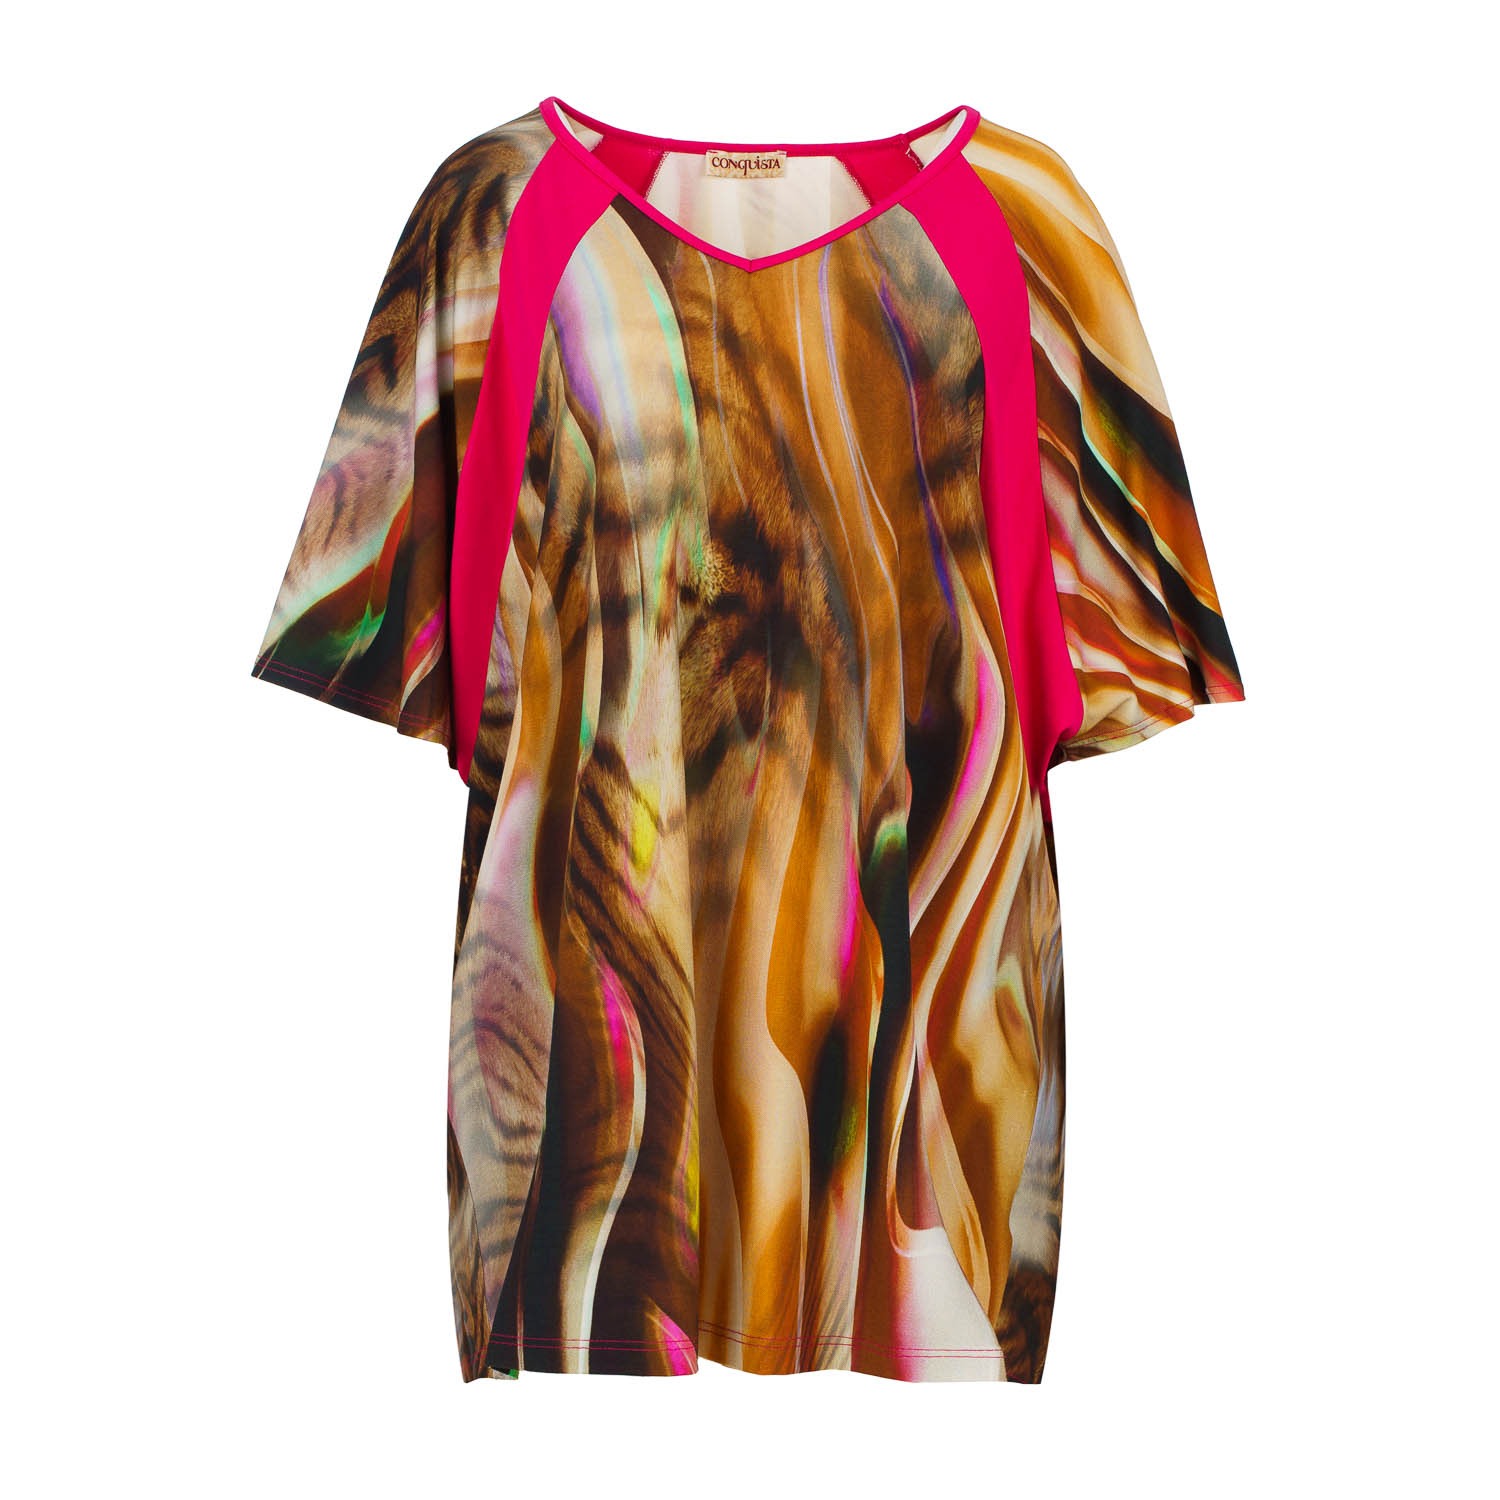 Women’s Print Stretch Jersey Top With Batwing Sleeves Plus Size Small Conquista